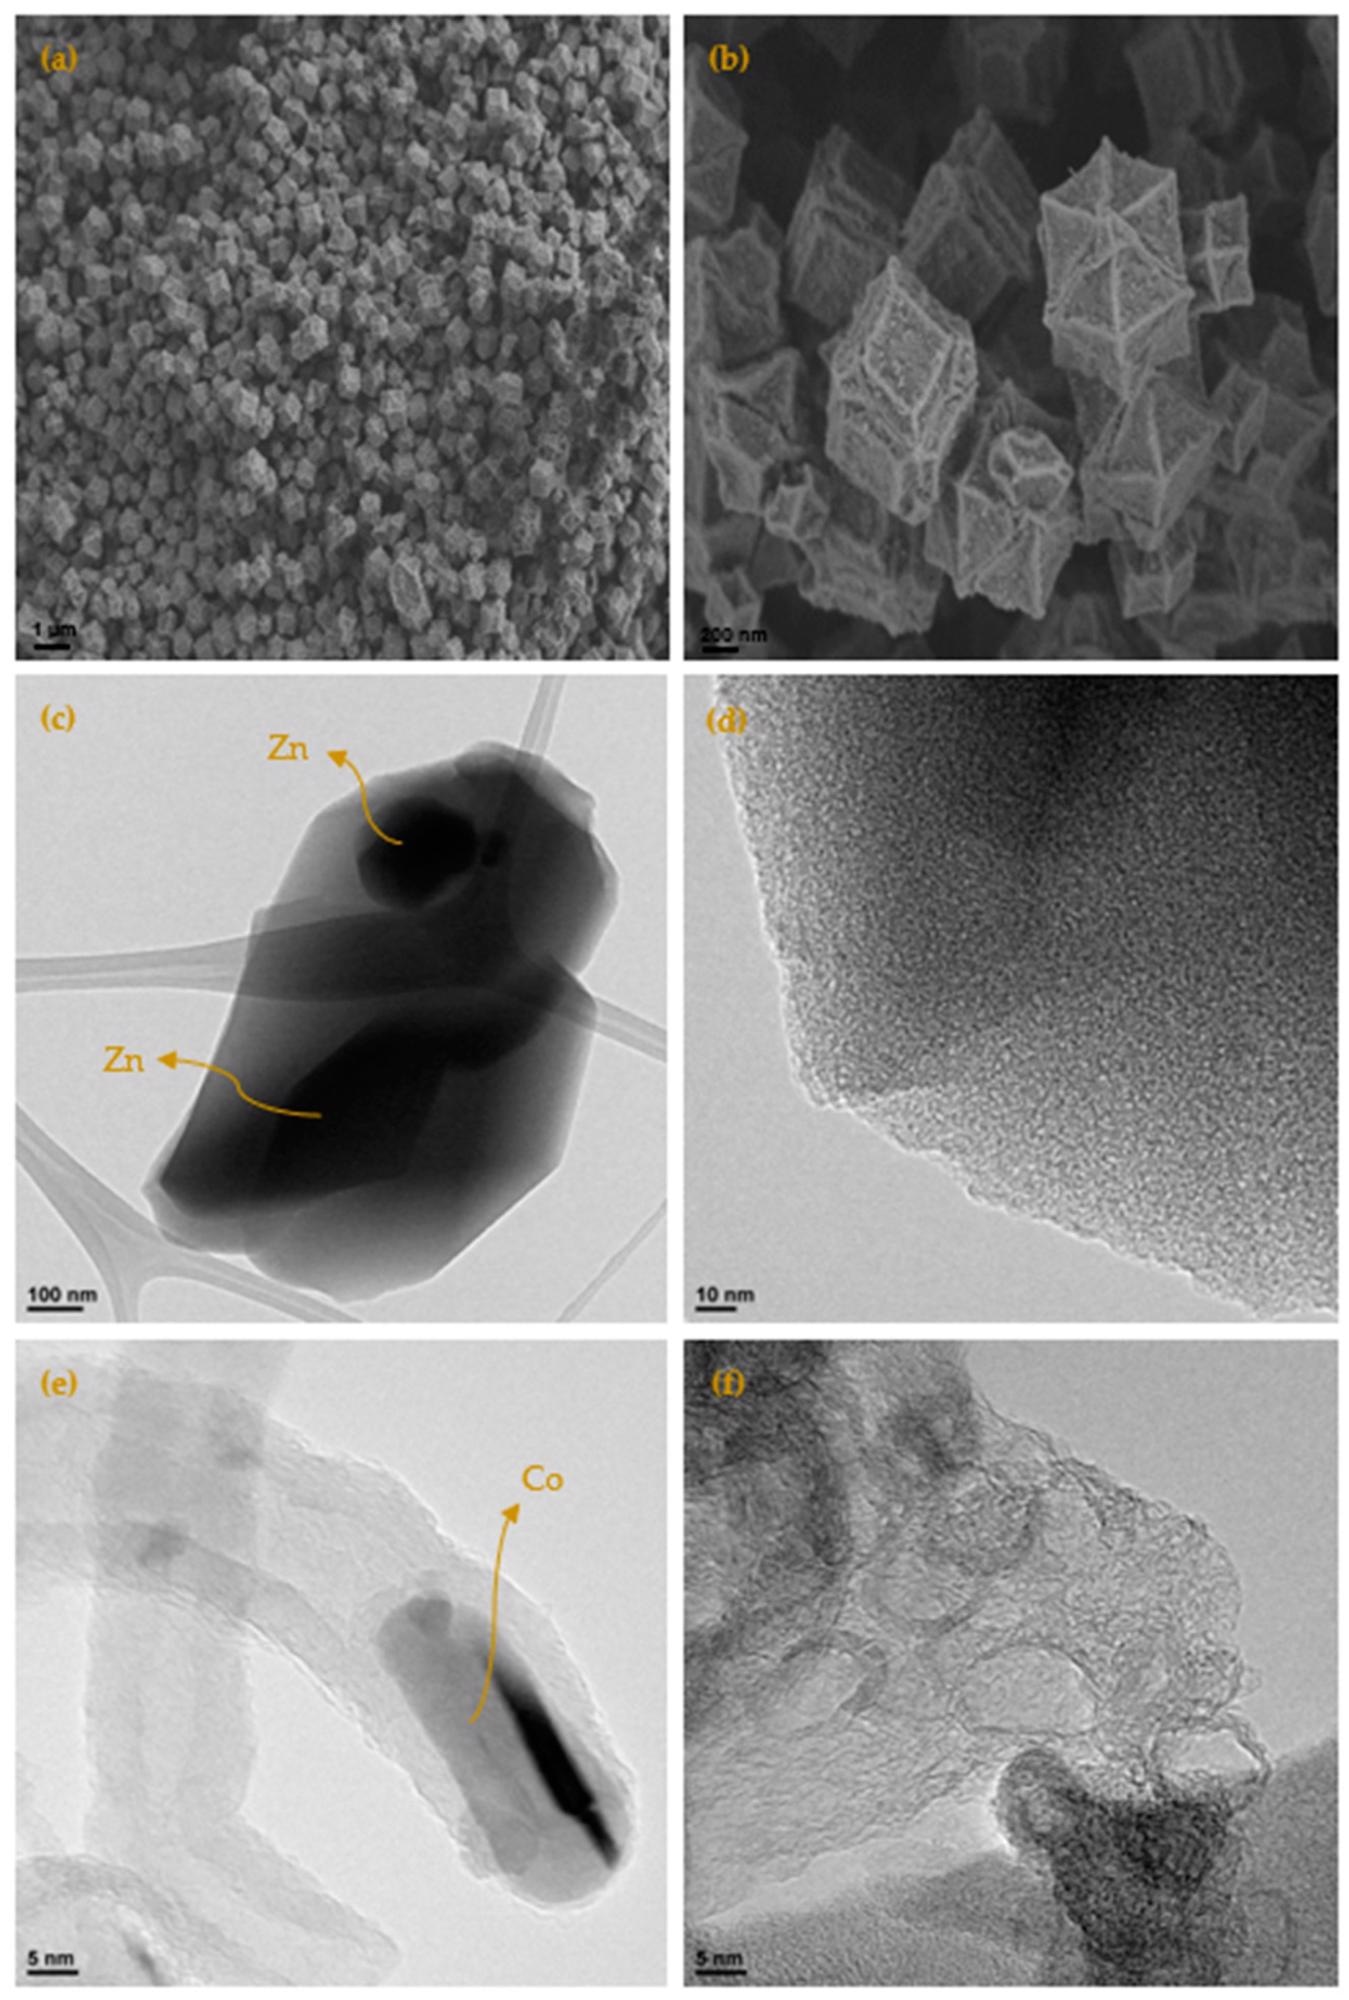 (a) SEM micrograph by means of secondary electrons of the carbonized sample at 700 °C (ZIF67C_700); (b) detail of the micrograph; (c) TEM micrograph of the sample ZIF8C_700, where the turbostratic microstructure of the carbon and the Zn particle can be clearly seen; (d) detail of the micrograph of the turbostratic zone; (e) TEM micrograph of the sample ZIF67C_900, where the formation of a carbon nanotube is shown, with the cobalt particle at one end and the highly ordered carbonaceous structure; (f) TEM micrograph of sample ZIF67C_900_2l, where it is clearly seen that the cobalt particles have been removed leaving the very crystalline structure of the carbon phase.